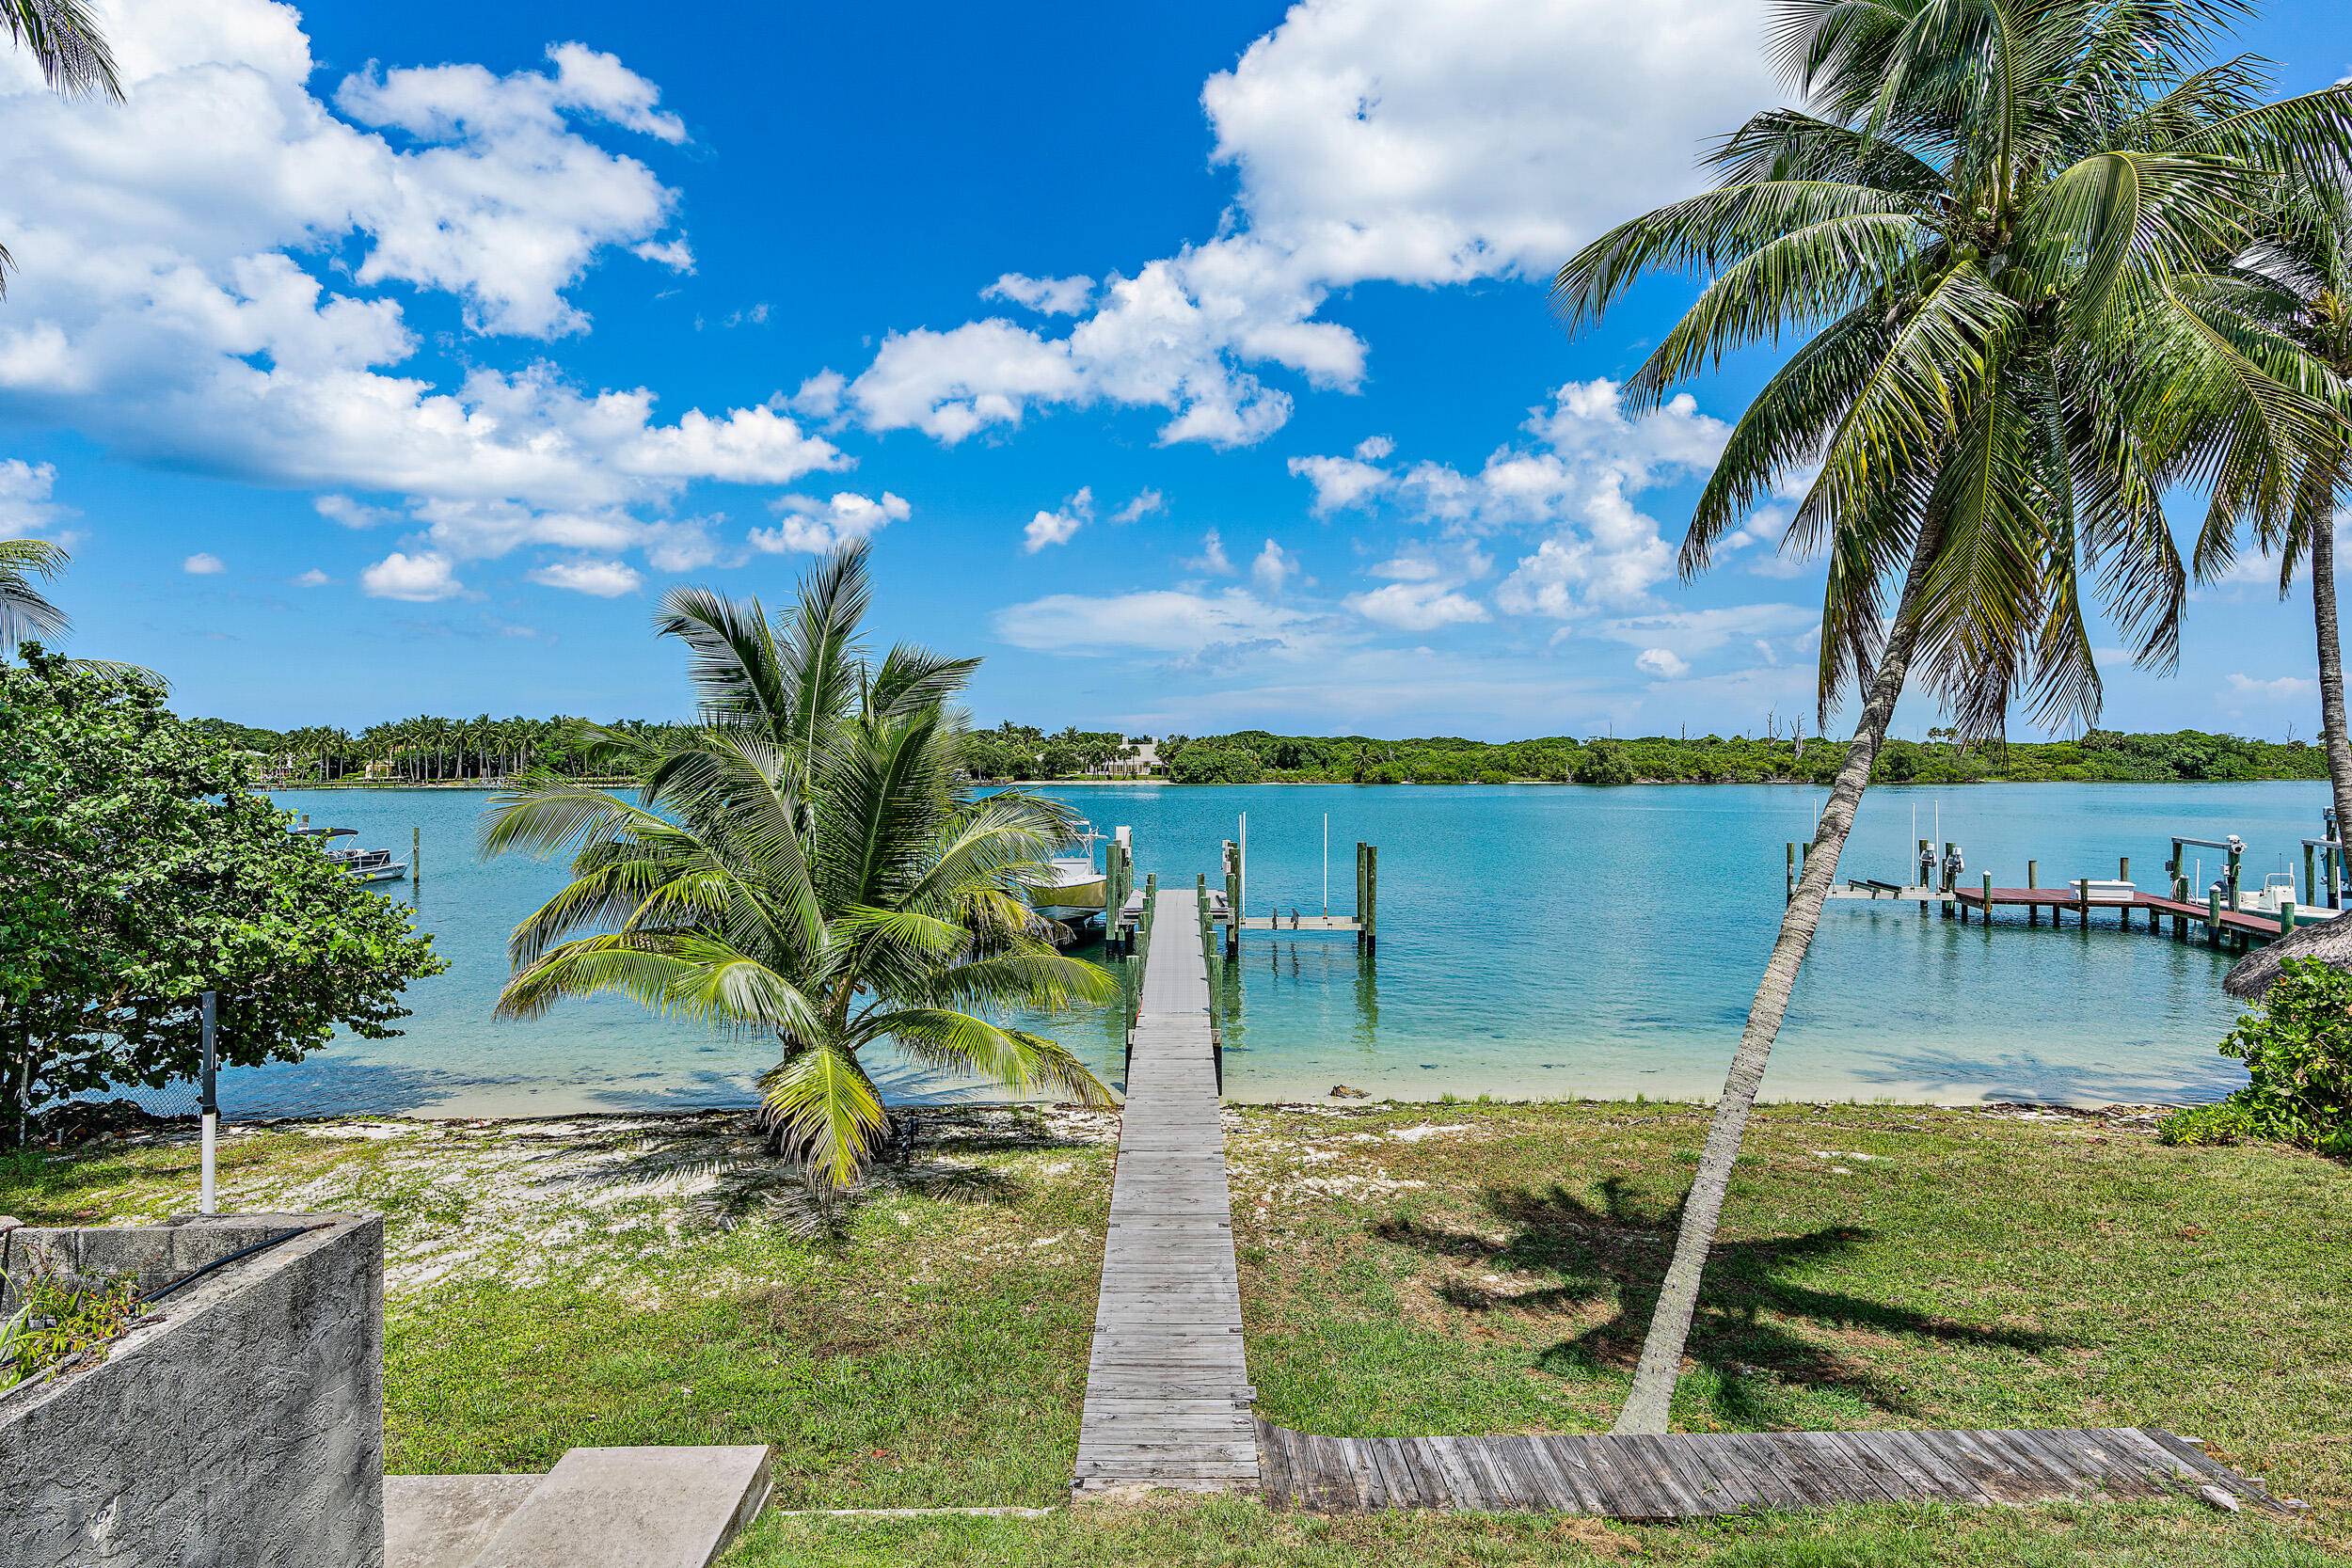 Have you been searching for the perfect waterfront getaway in Florida but nothing has spoken to you yet ?